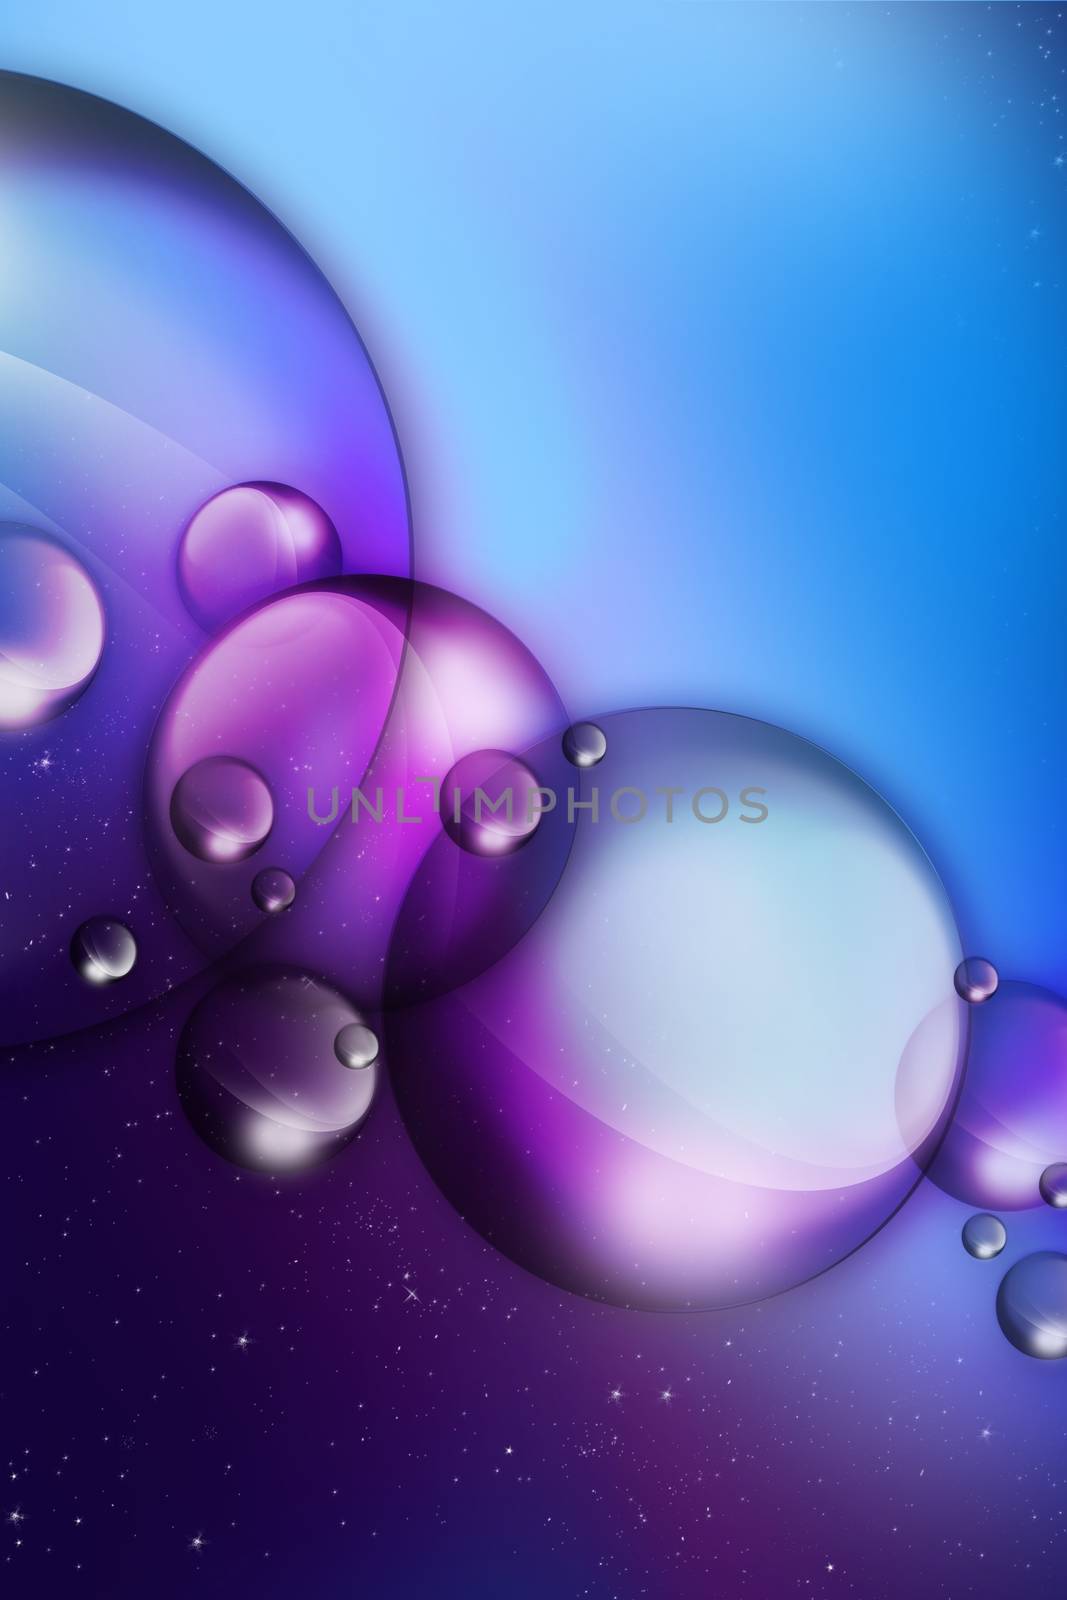 Fantasy-Abstract Illustration / Background. Glassy Space. Glassy Planets, NIght Sky and Baby Blue Copy Space Top. Vertical Illustration.